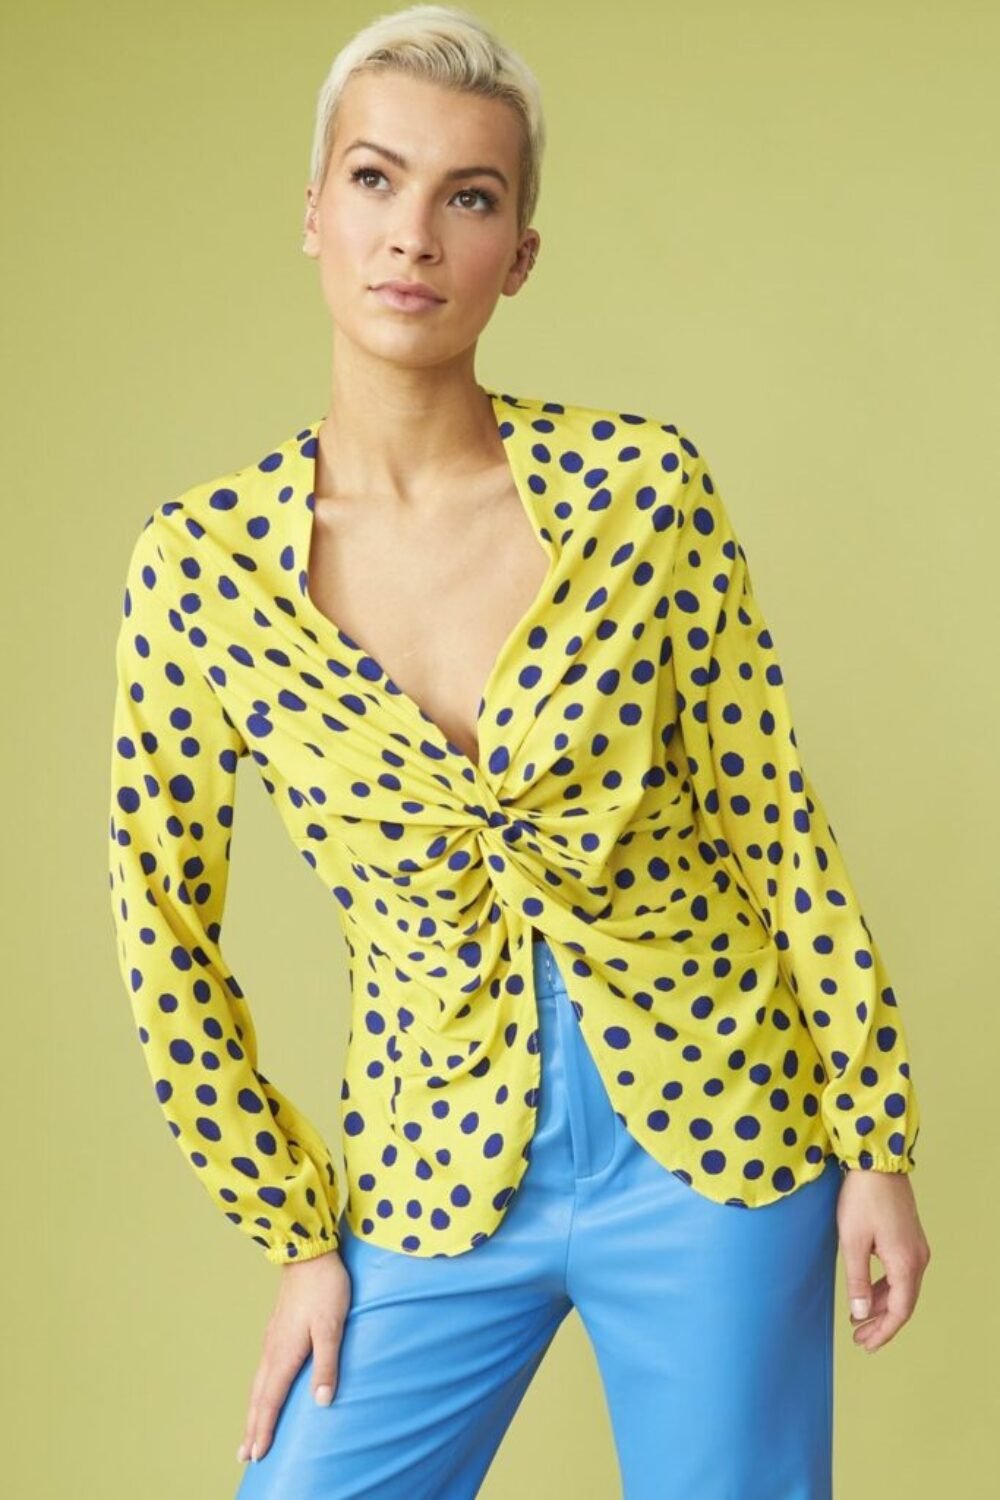 Shop Lux Rayon Polka Dot Ruffled Parma Blouse and women's luxury and designer clothes at www.lux-apparel.co.uk